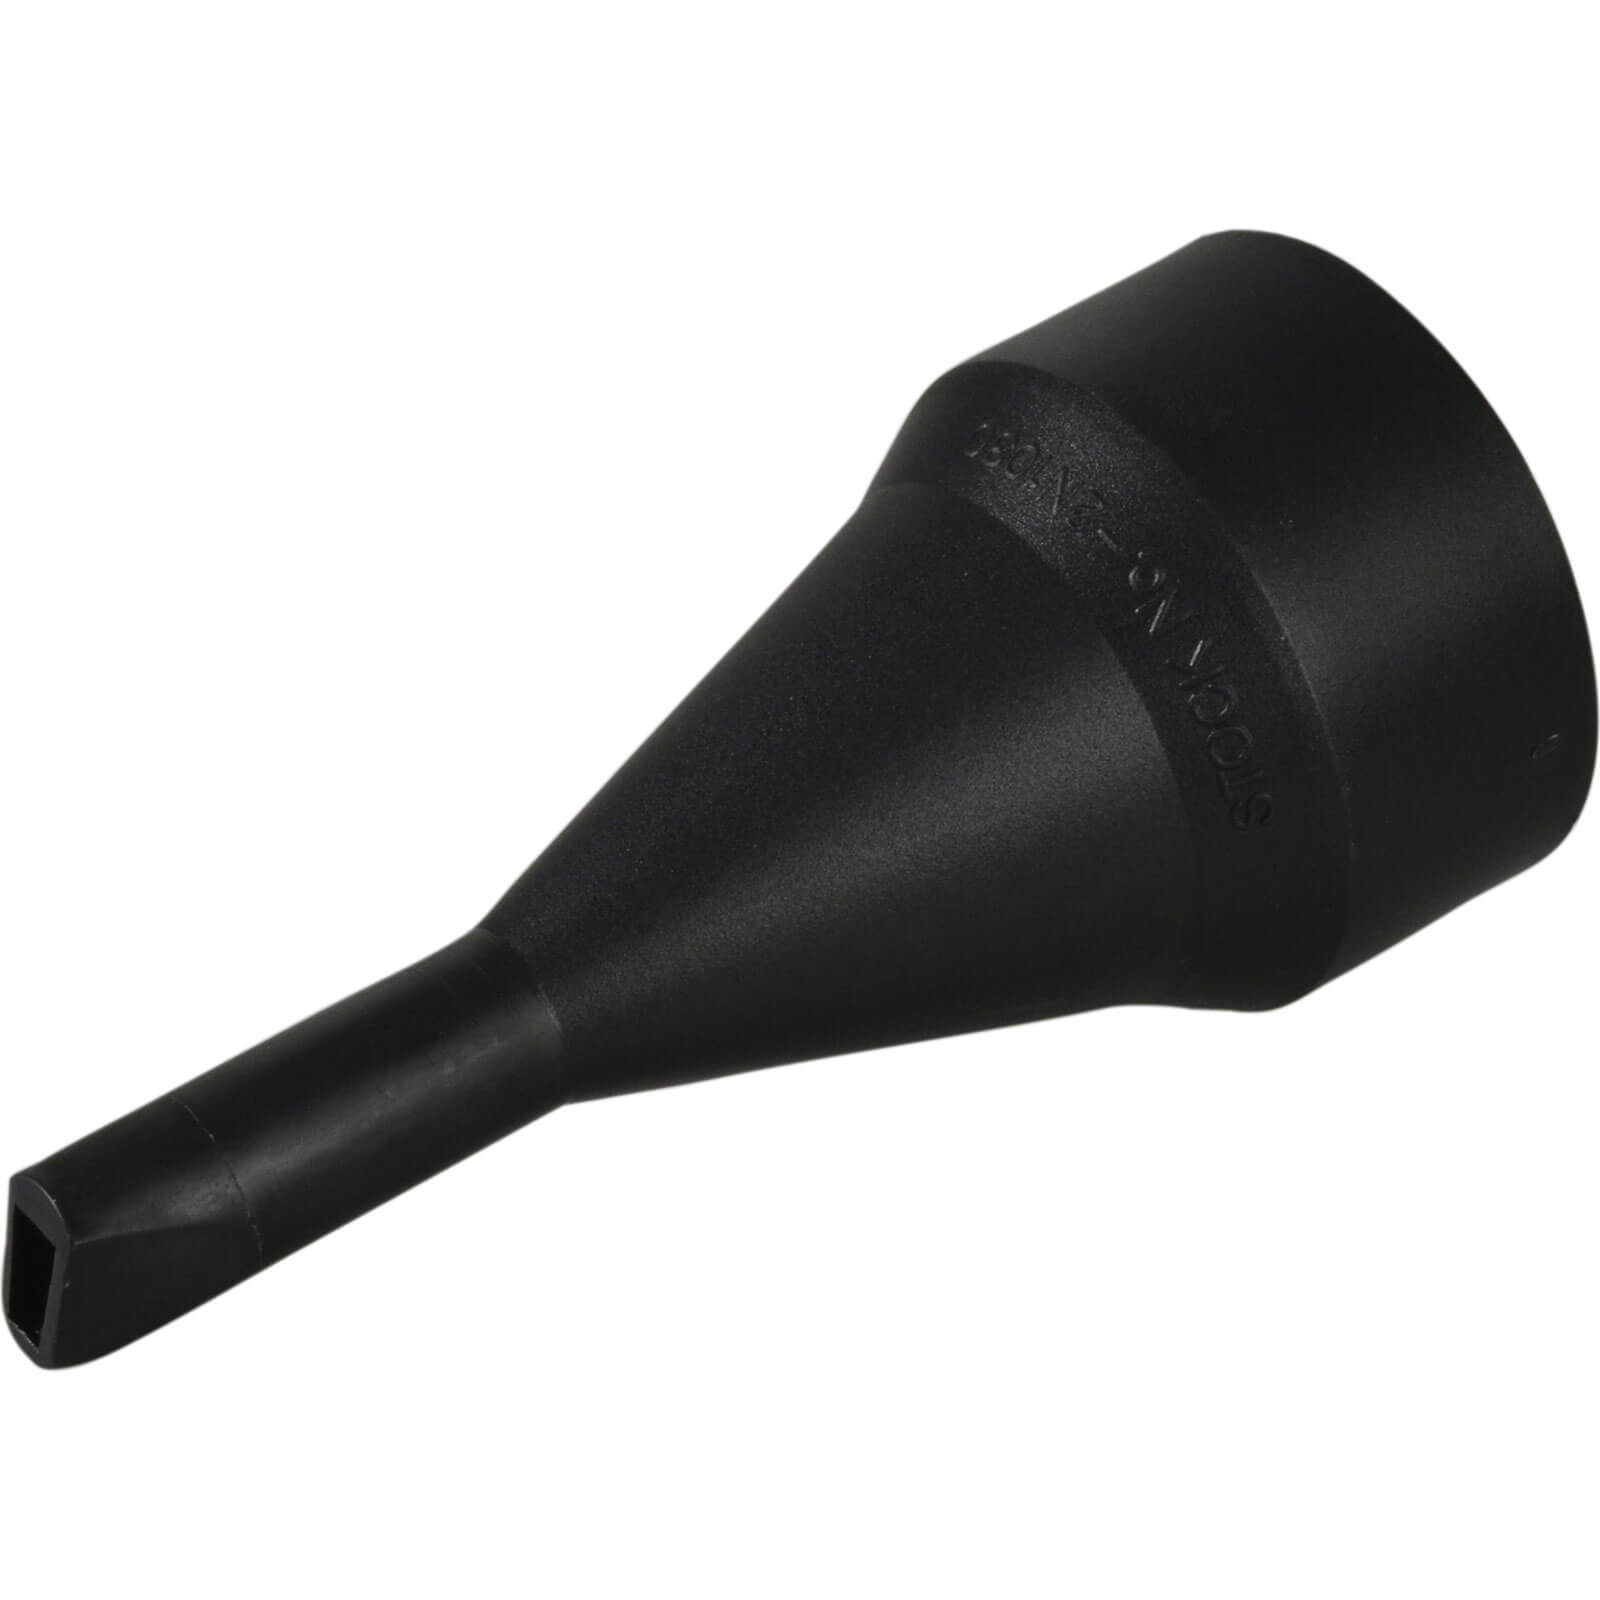 Photo of Cox 2n1030 Black Nozzle For Pointing